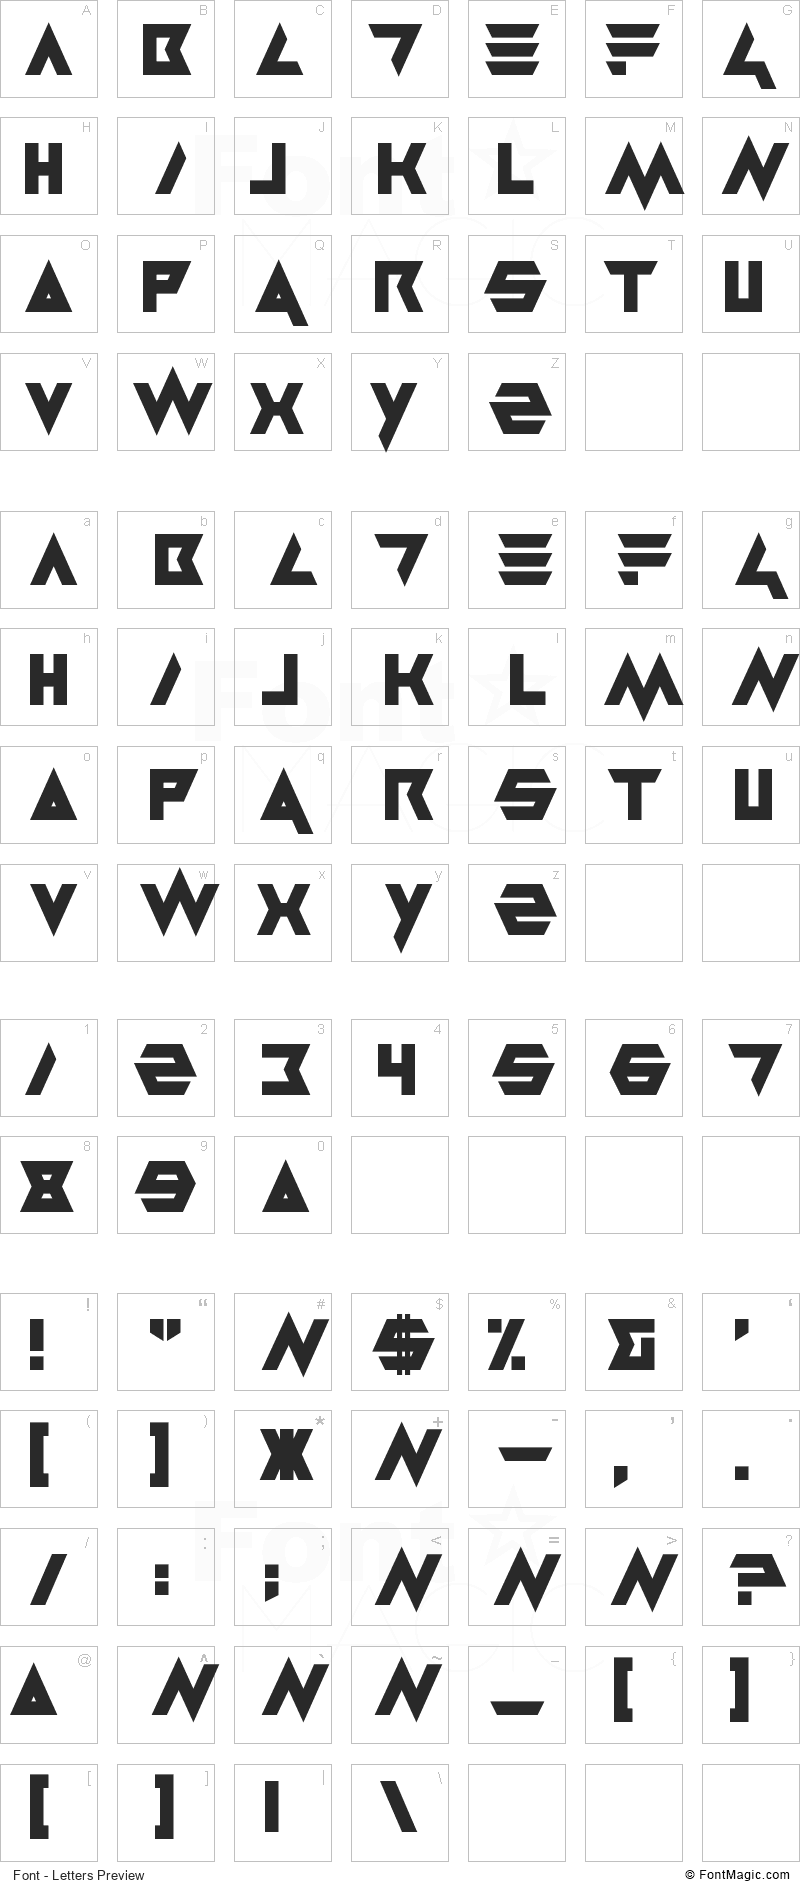 Masterblast Font - All Latters Preview Chart